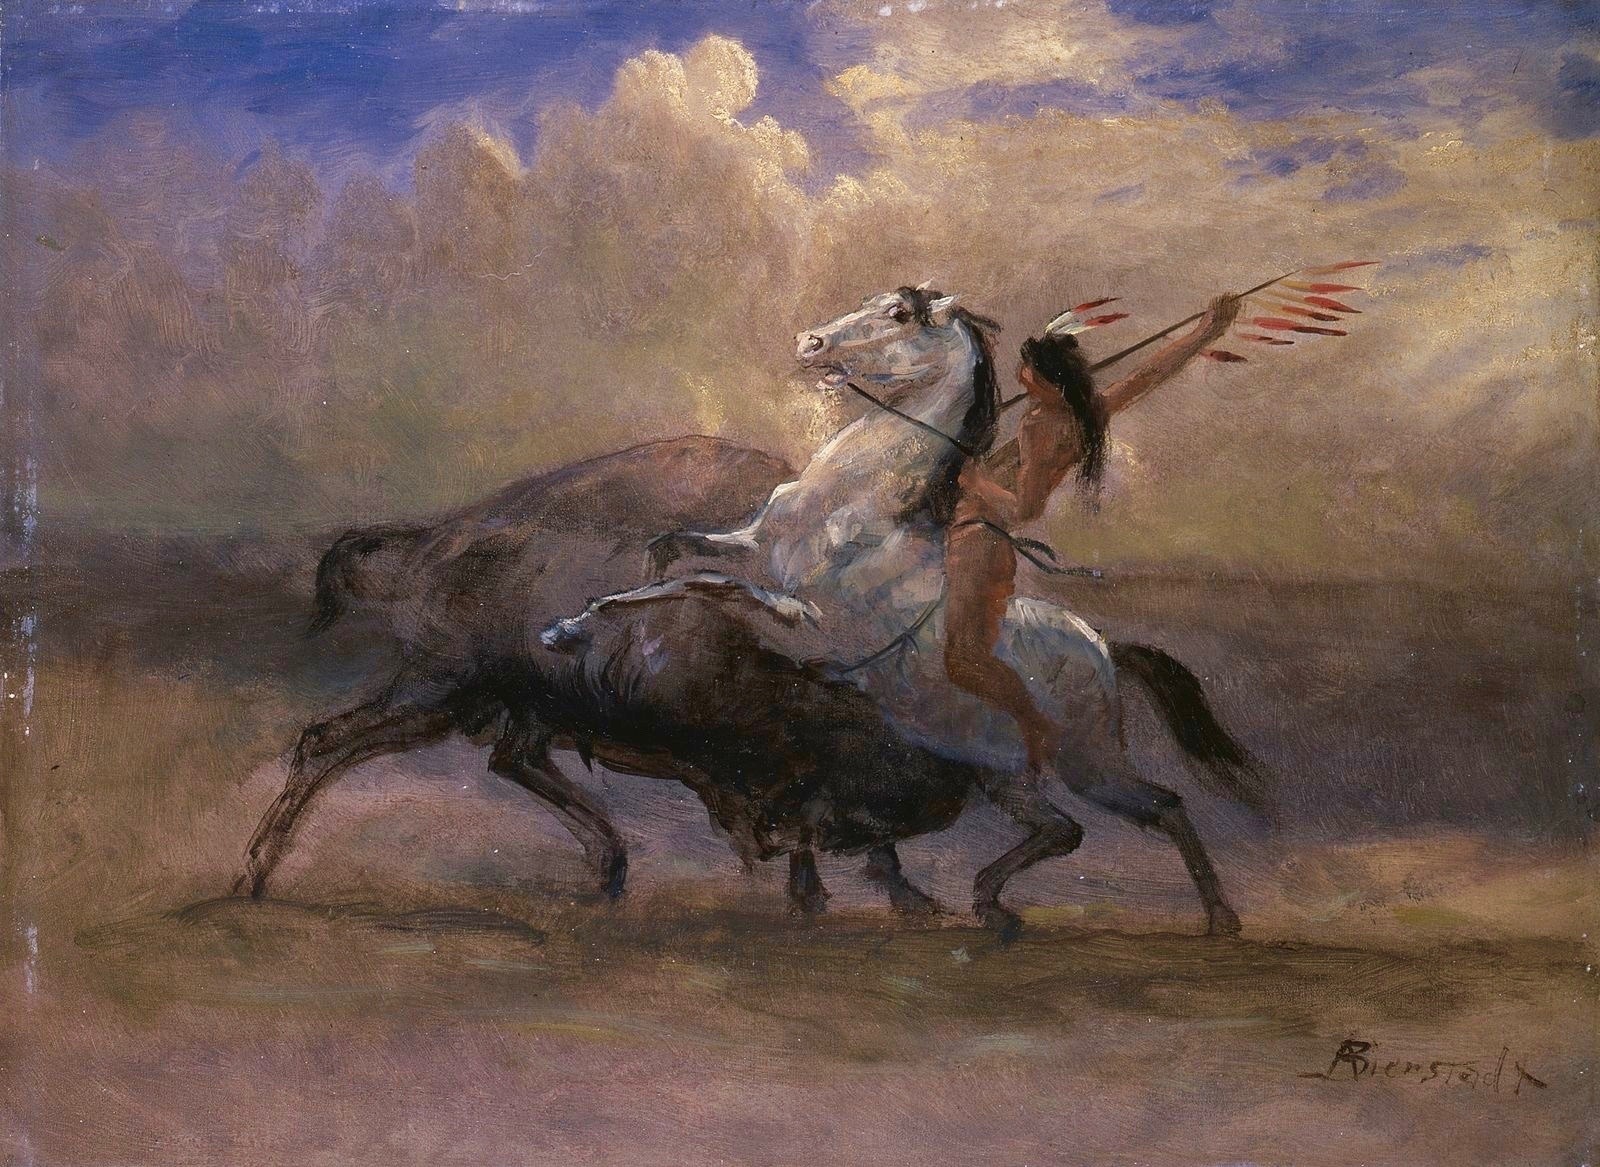 The sketch which informed Albert Bierdstadt's epic masterwork 'Last of the Buffalo" in the permanent collection of the Buffalo Bill Center of the West. See finished painting below in story.